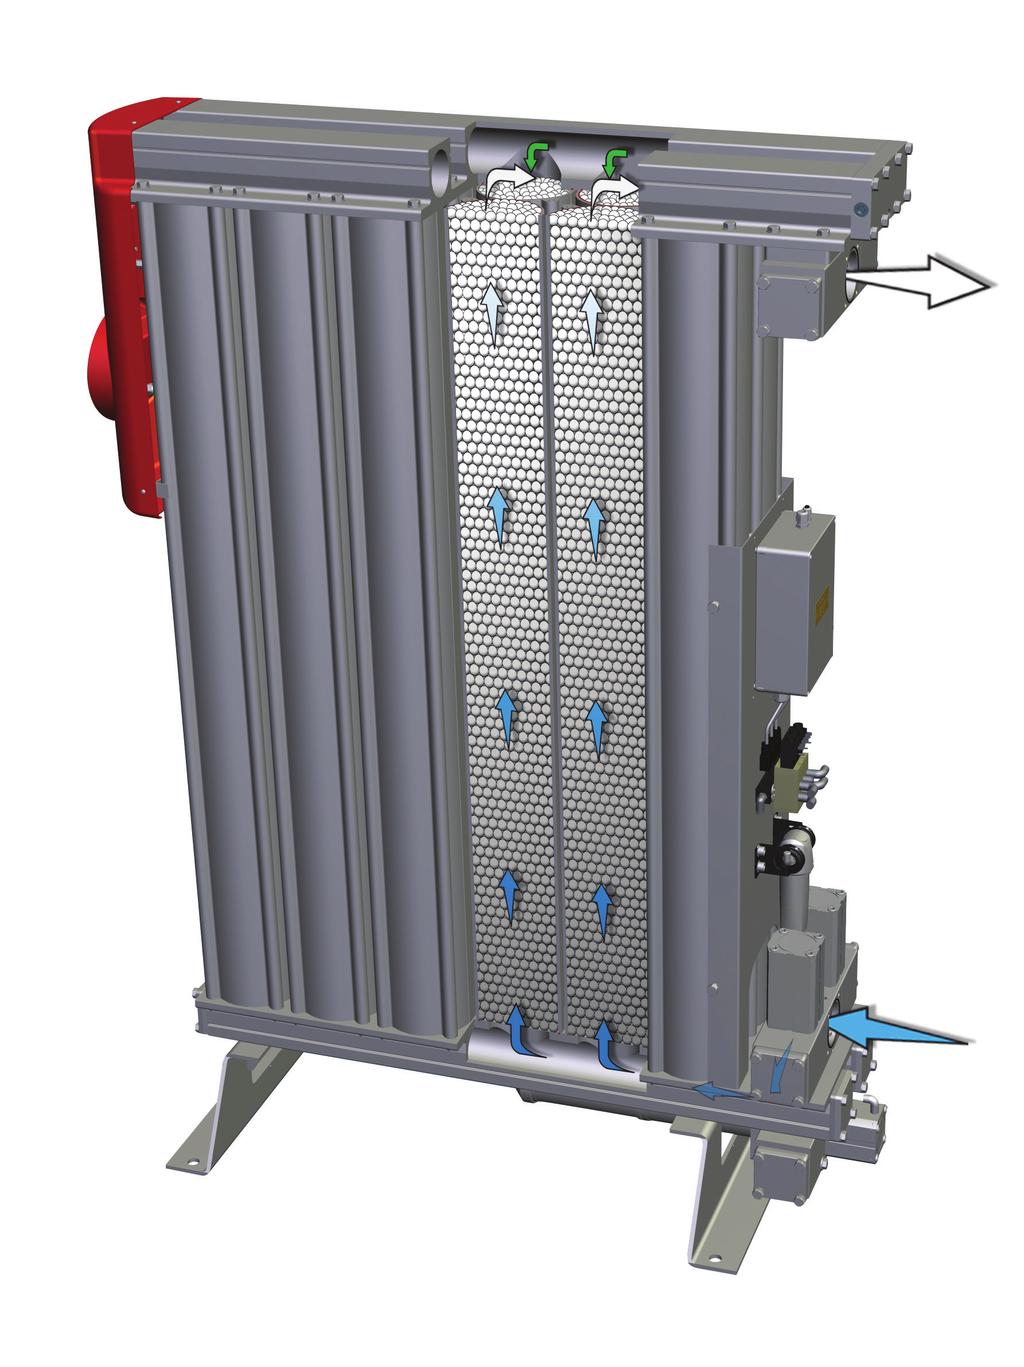 Purge Air Upper Distribution Manifold Dry Air Out Control Facia Drying Columns Wet Air In Lower Distribution Manifold One chamber is operational (drying), while the opposite chamber is regenerating